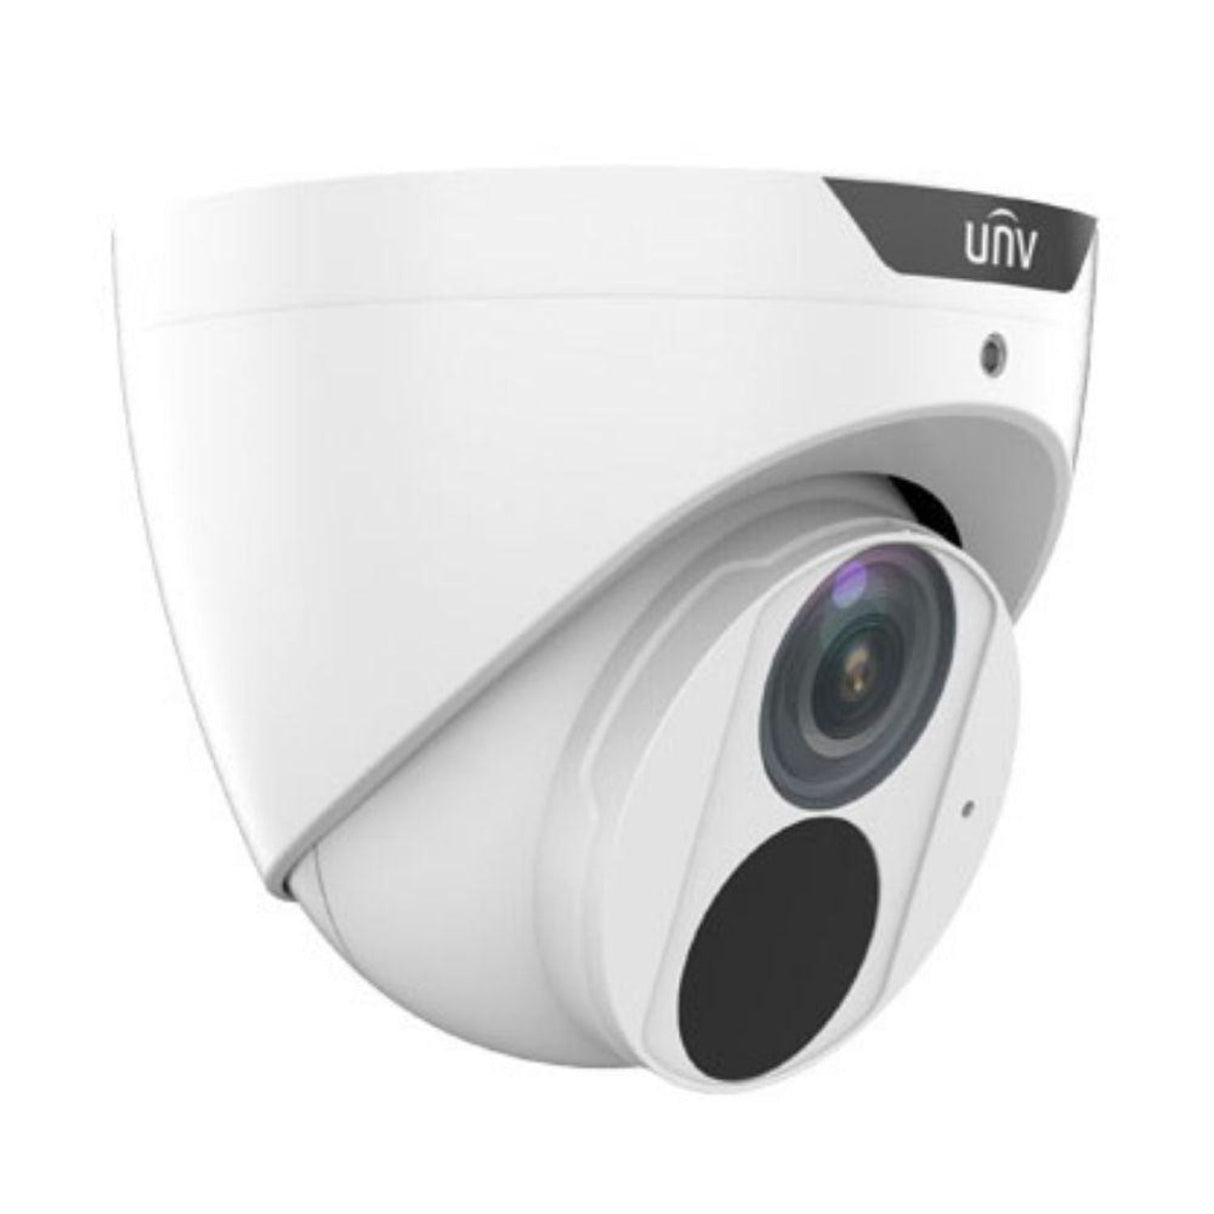 Uniview LightHunter Security System: 16x 6MP Turret Cams, 16CH 4K NVR + HDD